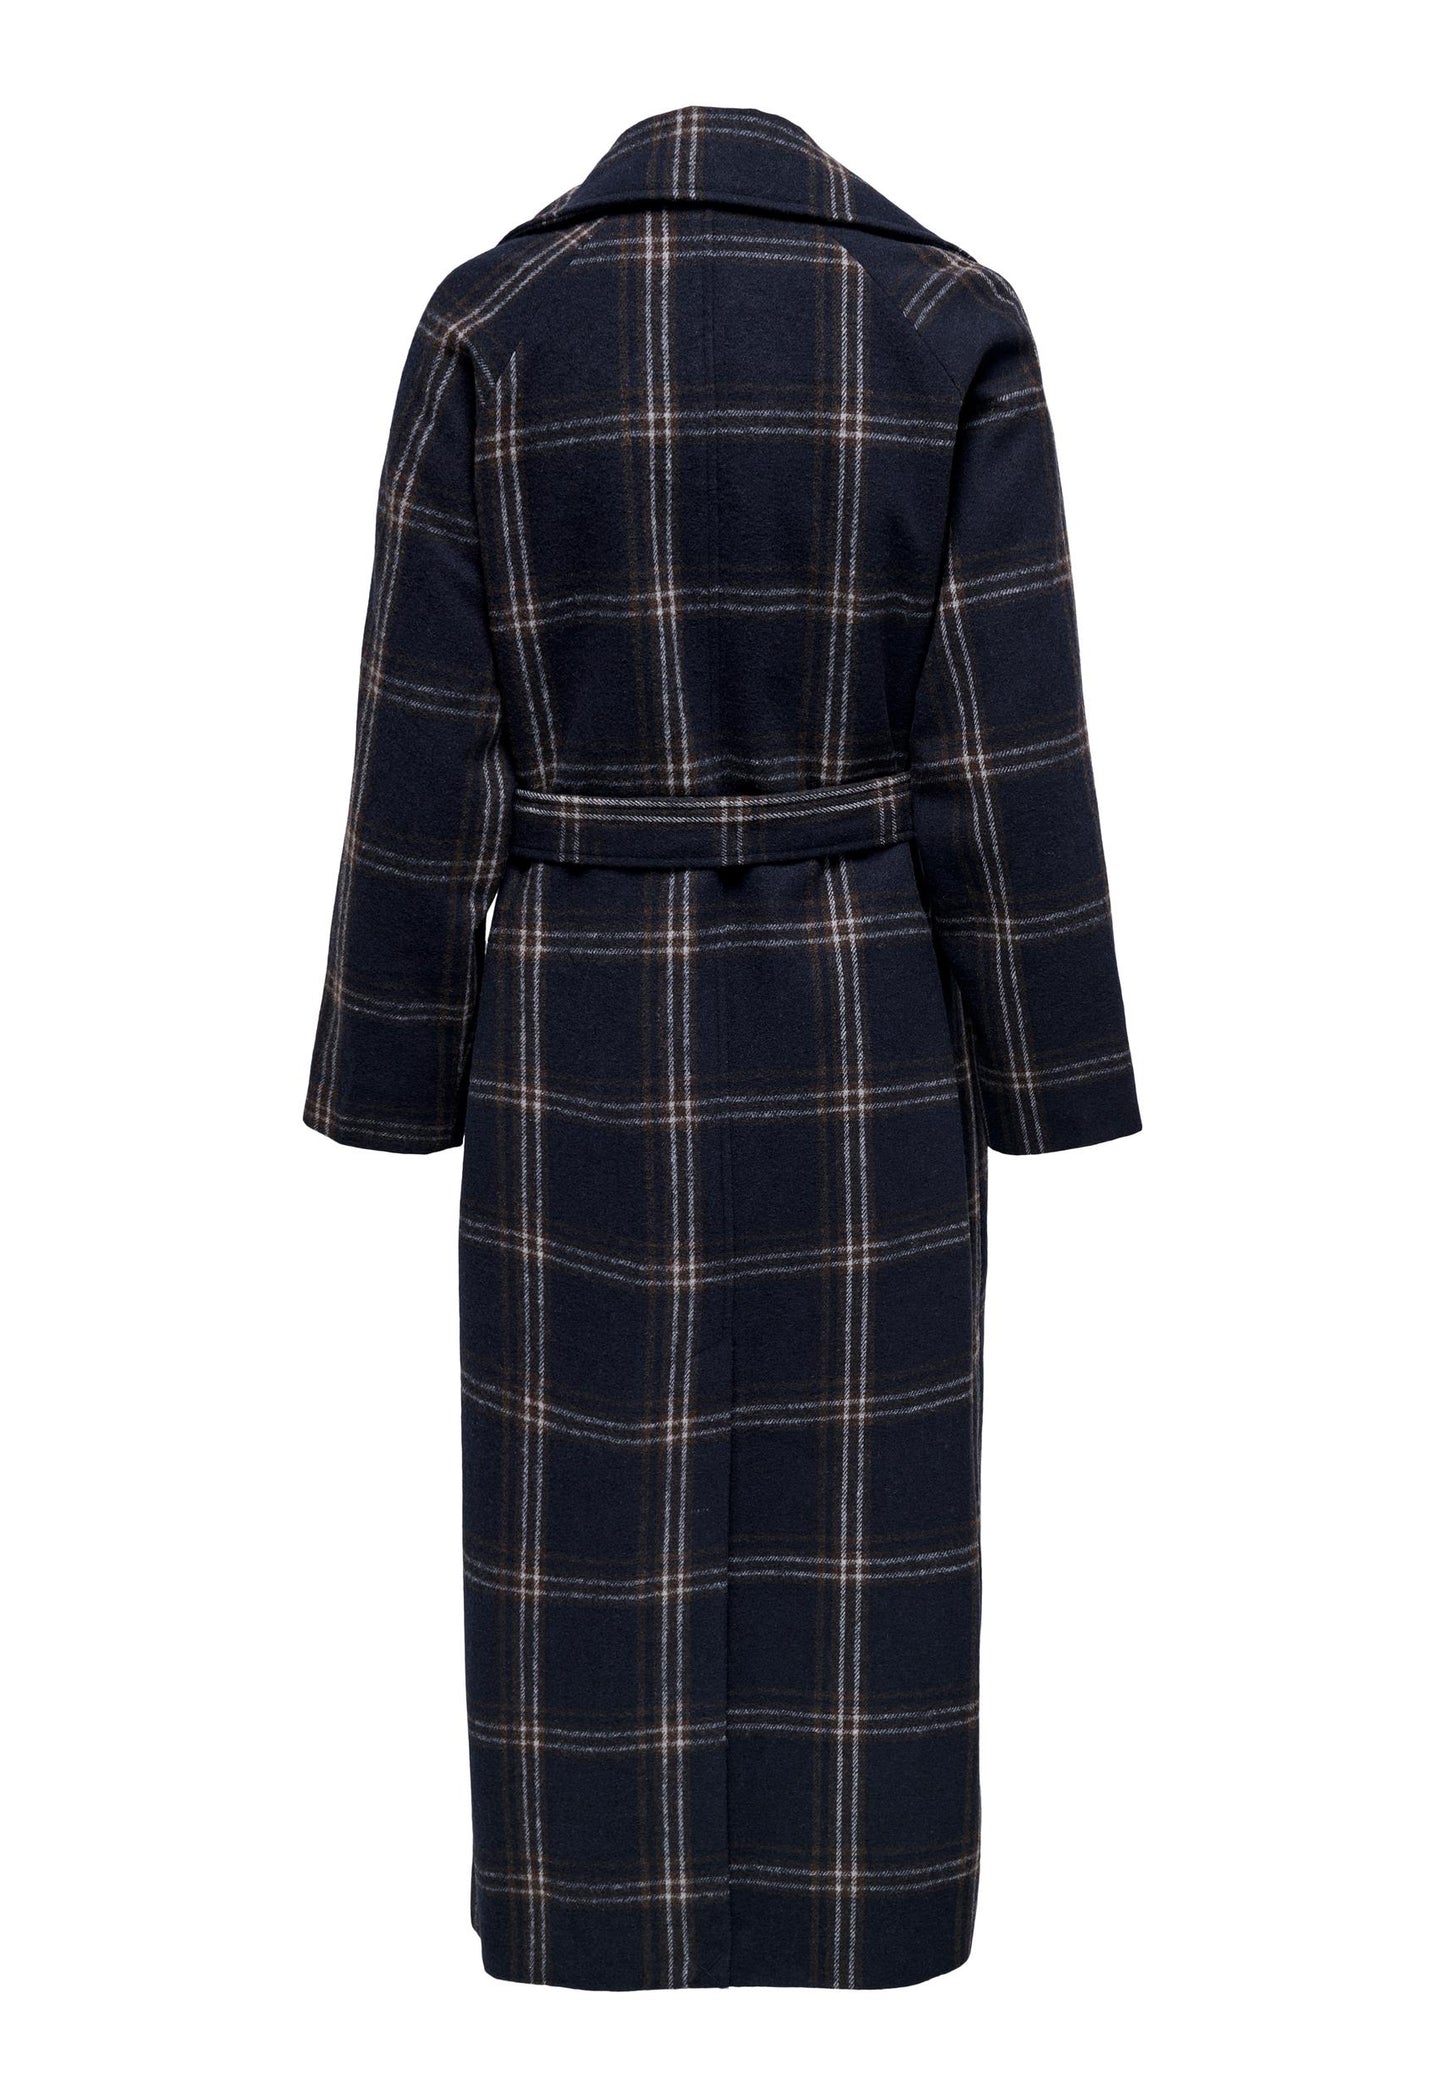 ONLY Patty Smart Double Breasted Longline Check Wool Trench Coat in Navy - One Nation Clothing